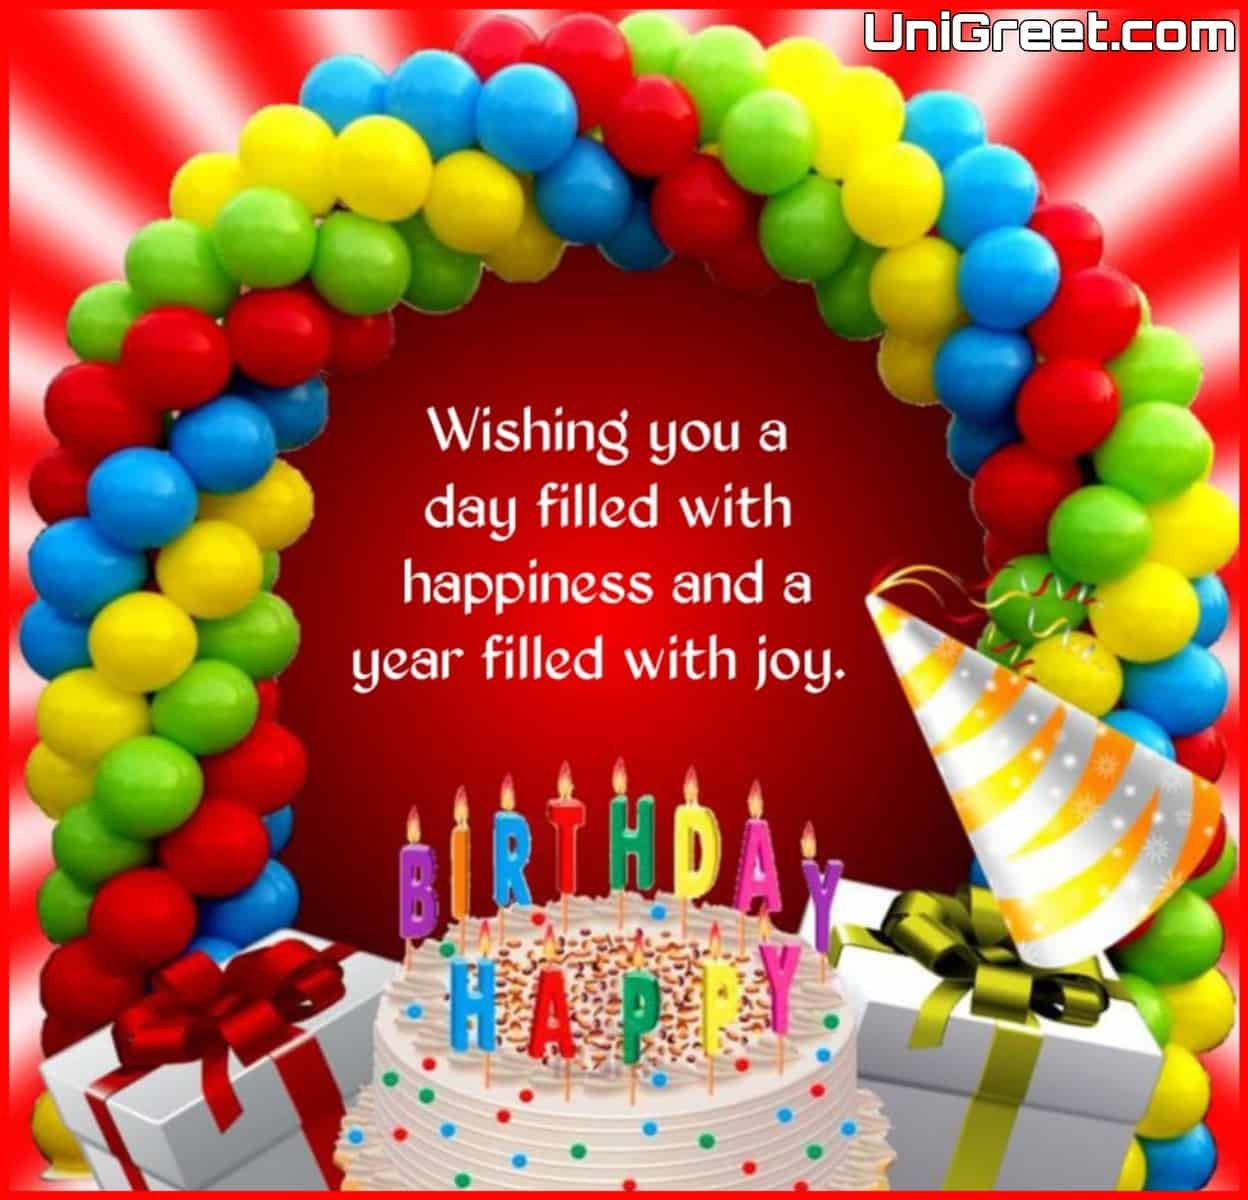 Astonishing Compilation of Full 4K Happy Birthday Greetings Images – Over 999 Fascinating Choices